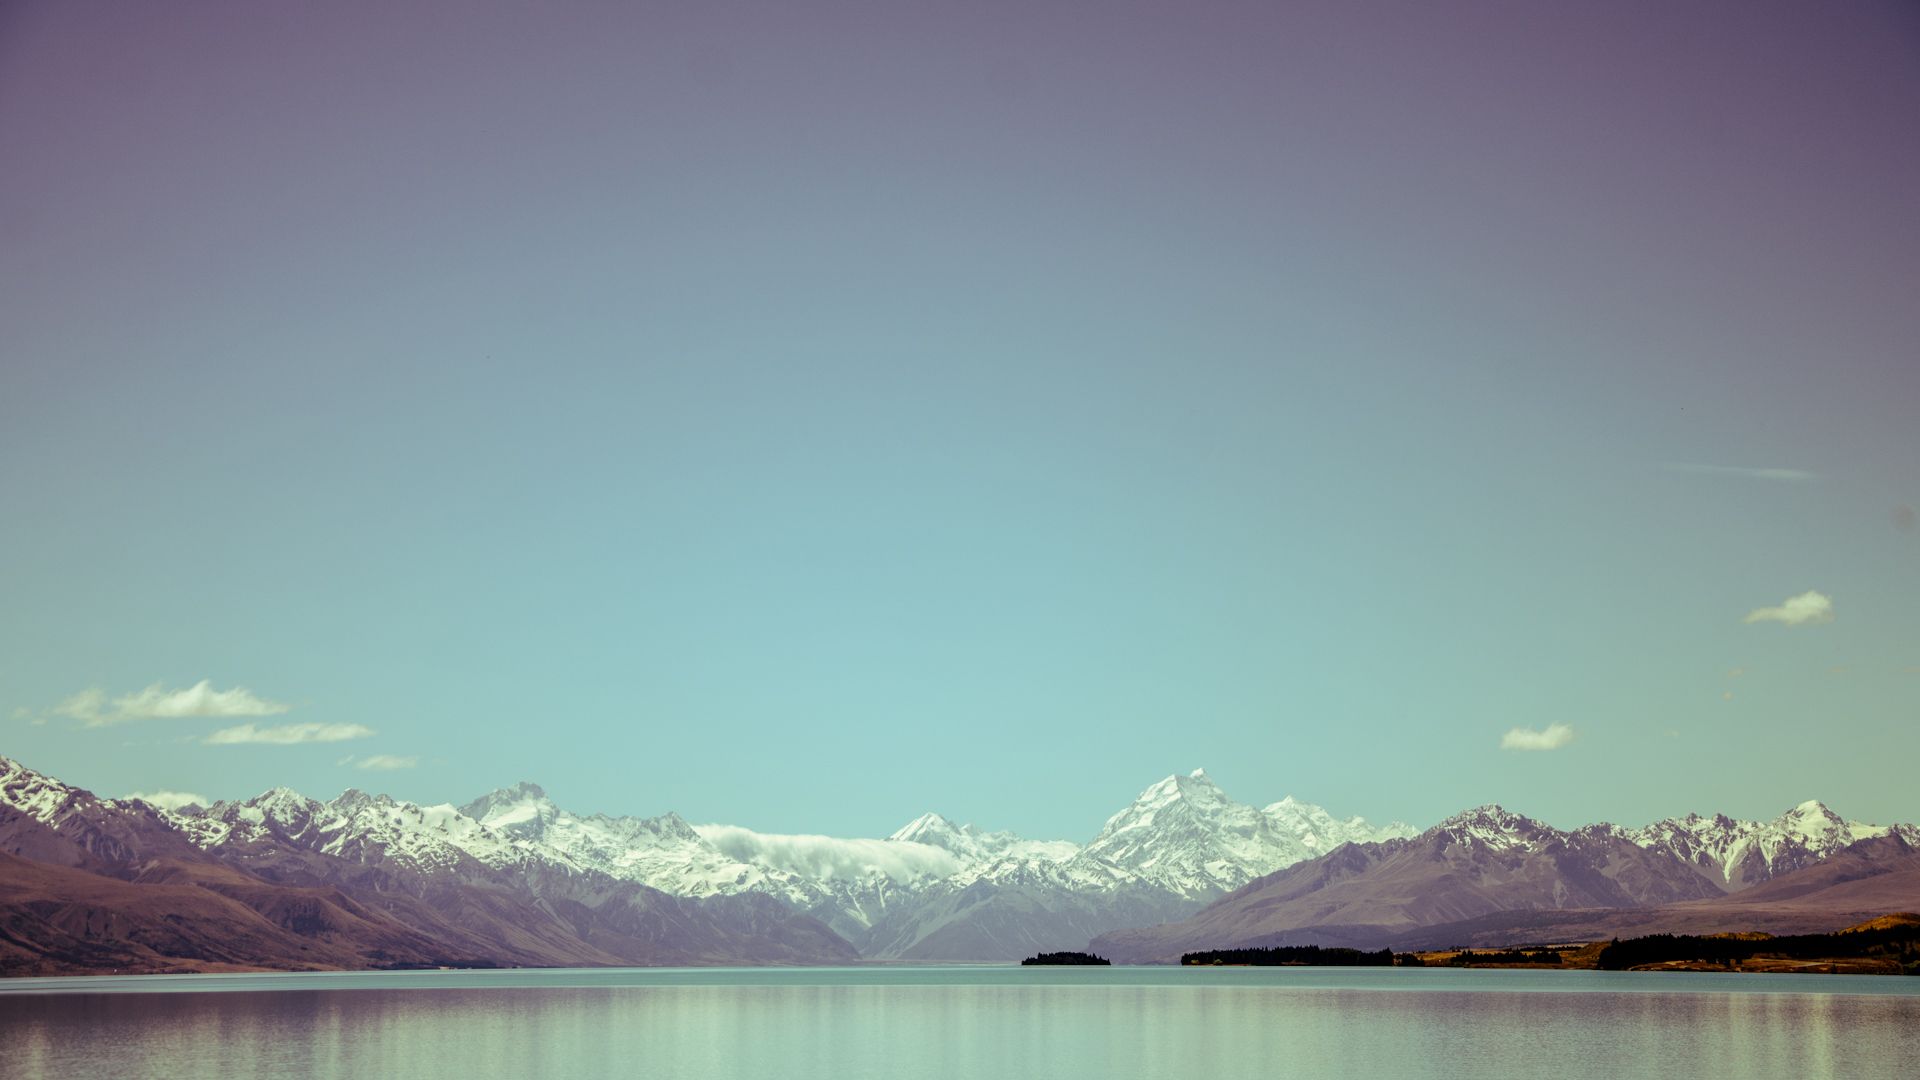 Blue Sky, Snowy Mountains - HD Wallpapers